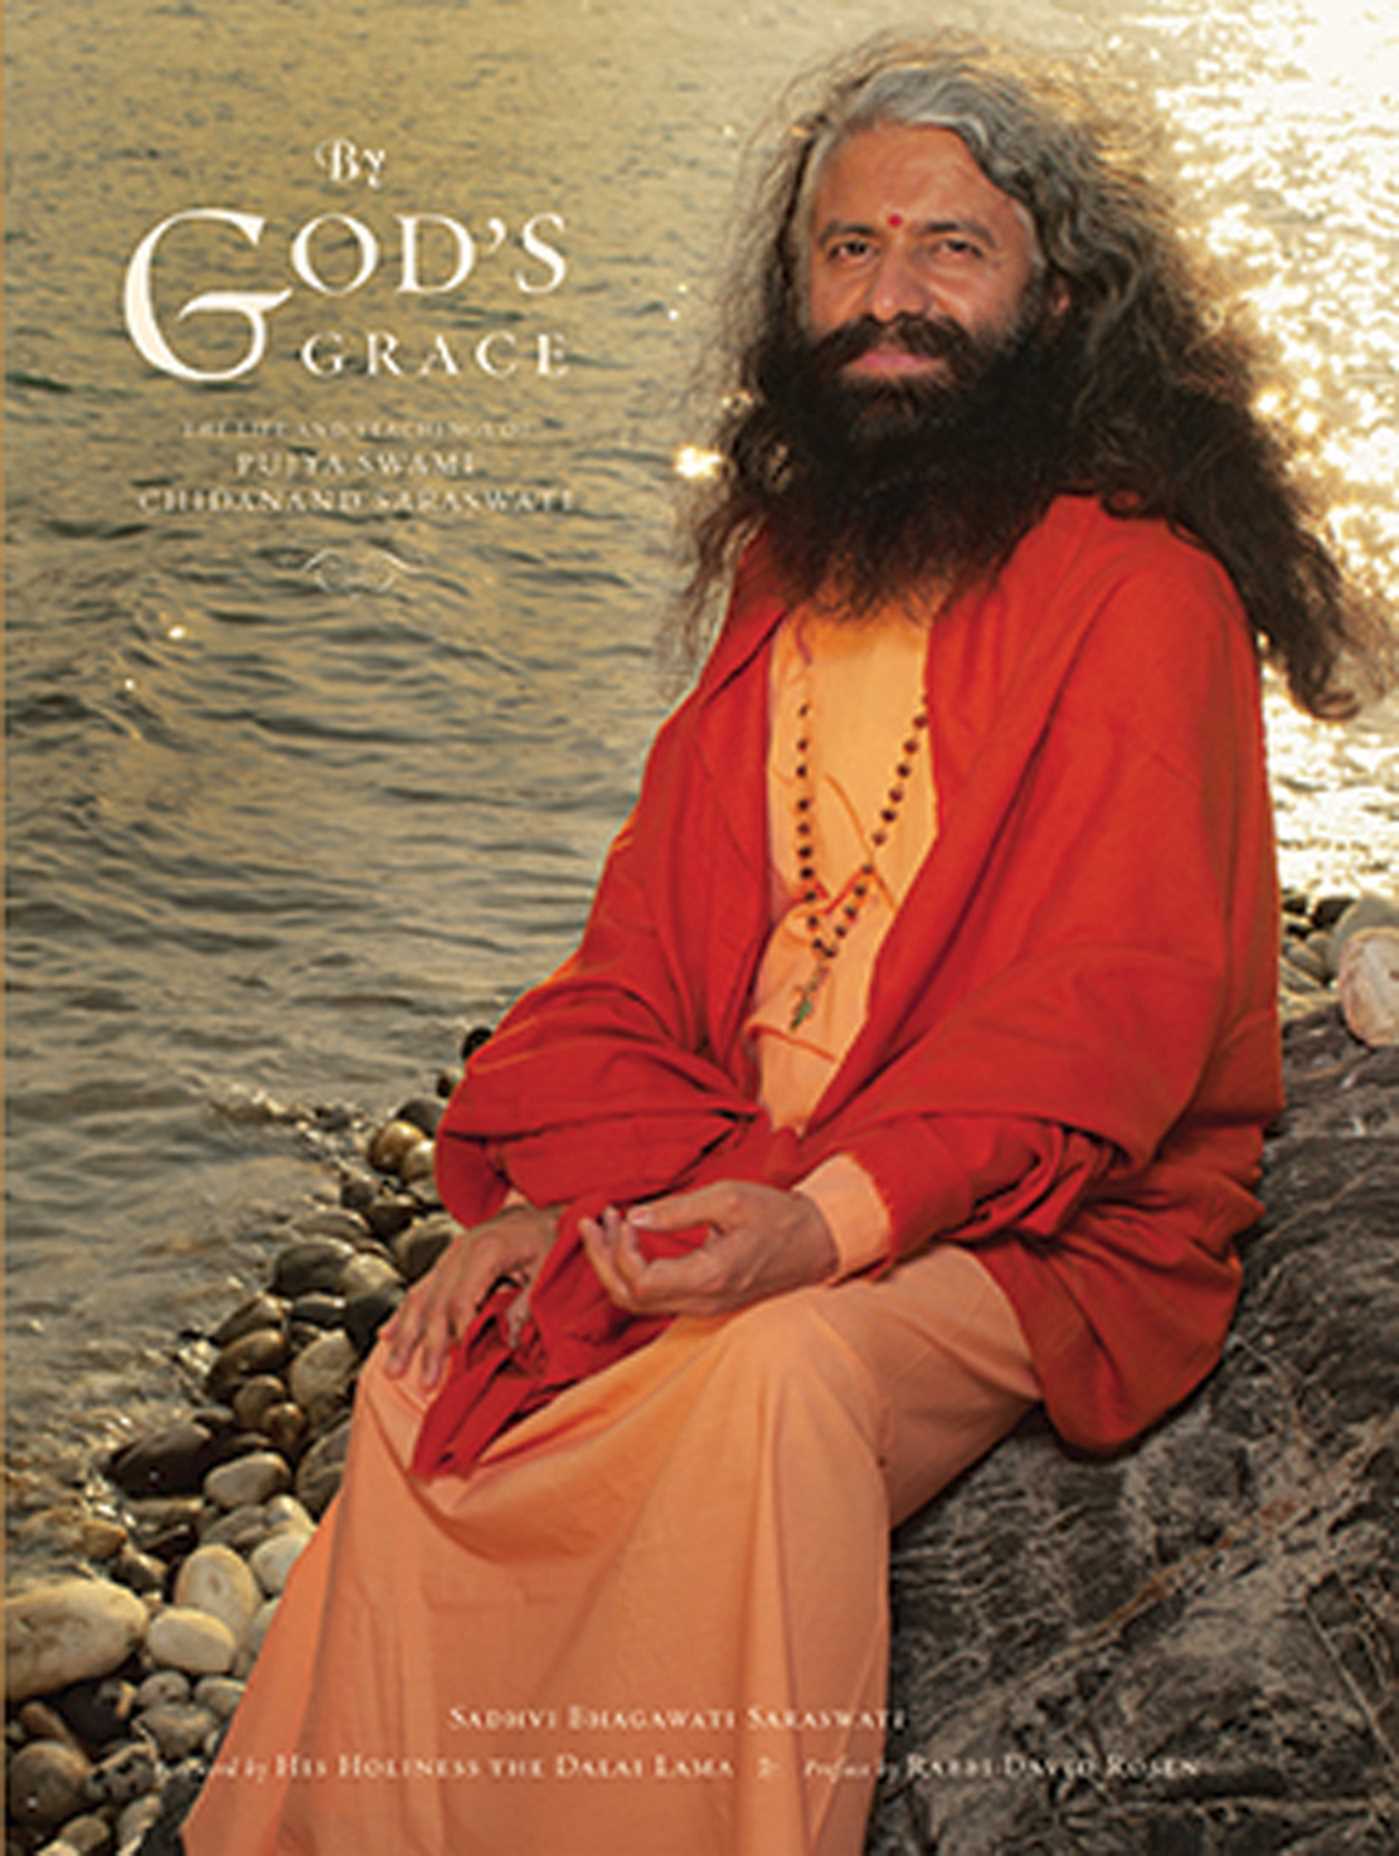 By God's Grace : The Life and Teachings of Pujya Swami Chidanand Saraswati